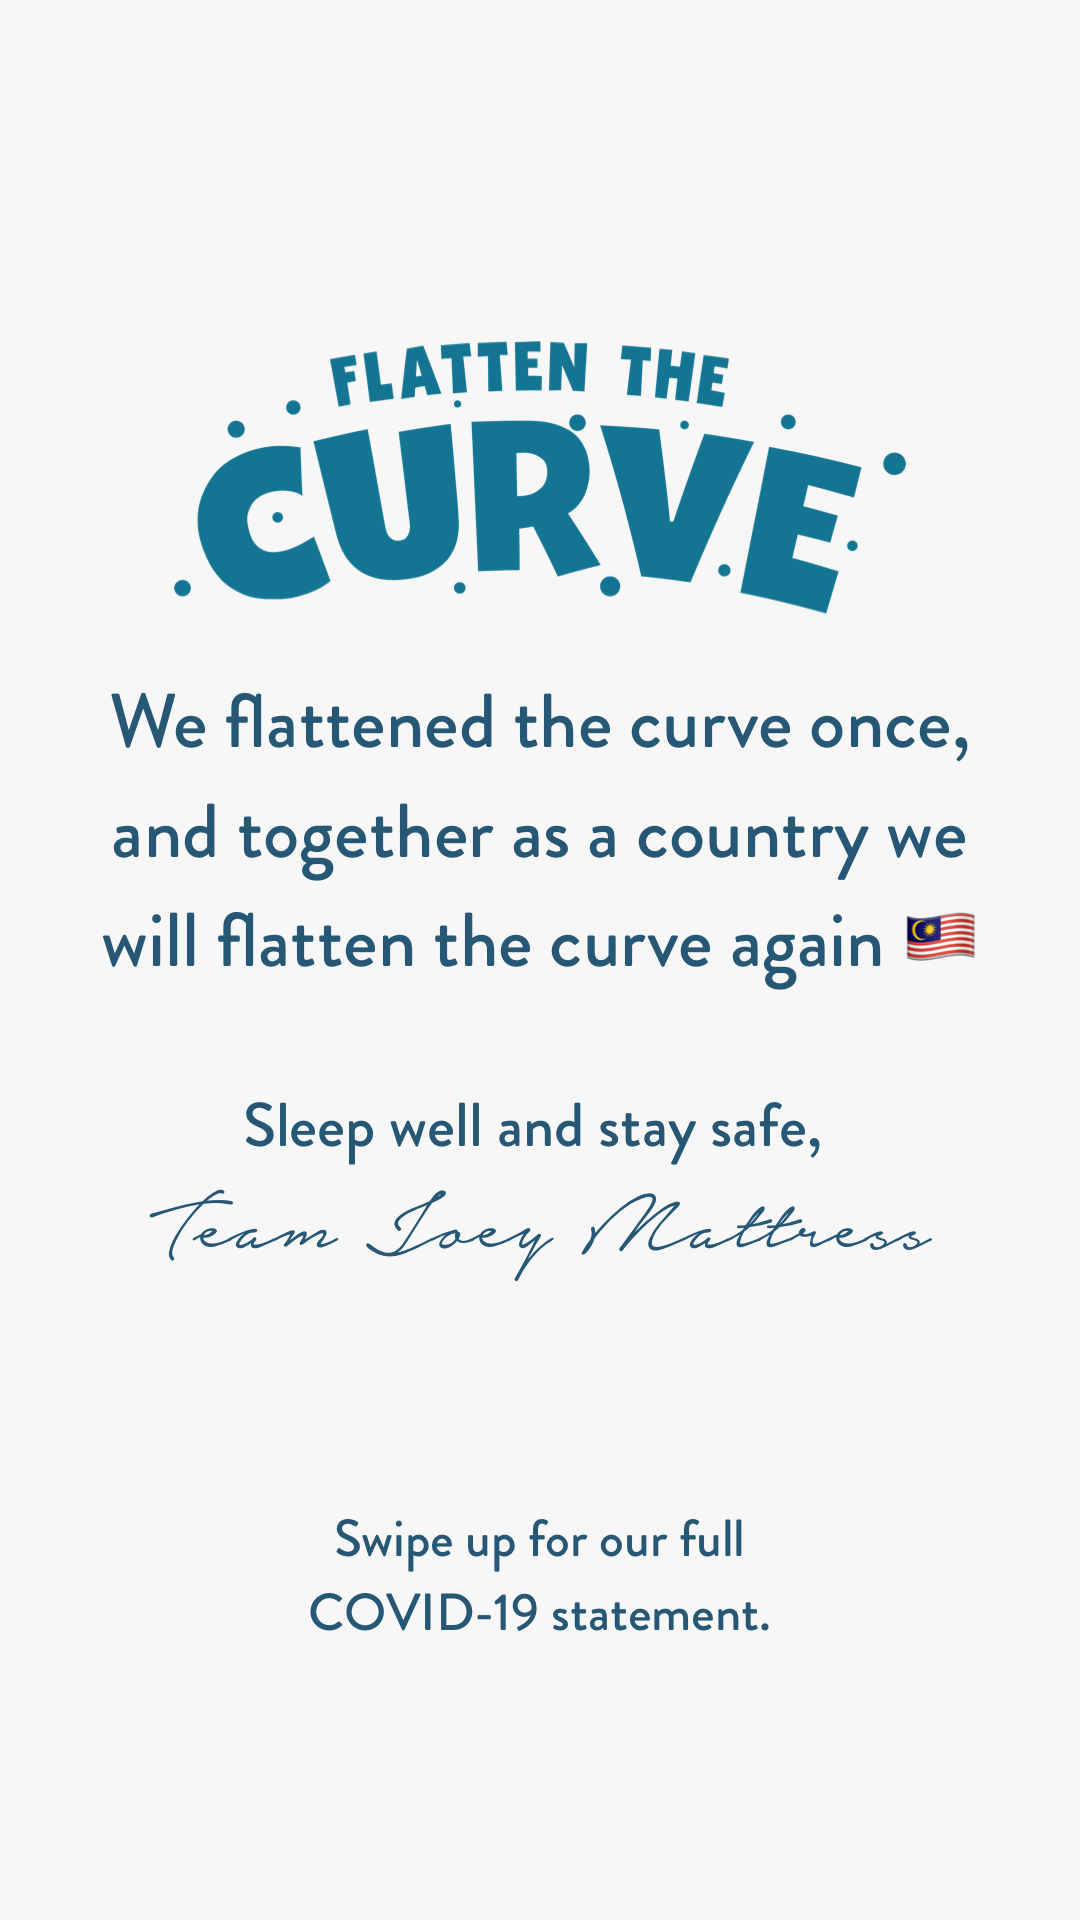 We flattened the curve once, we will flatten the curve again.